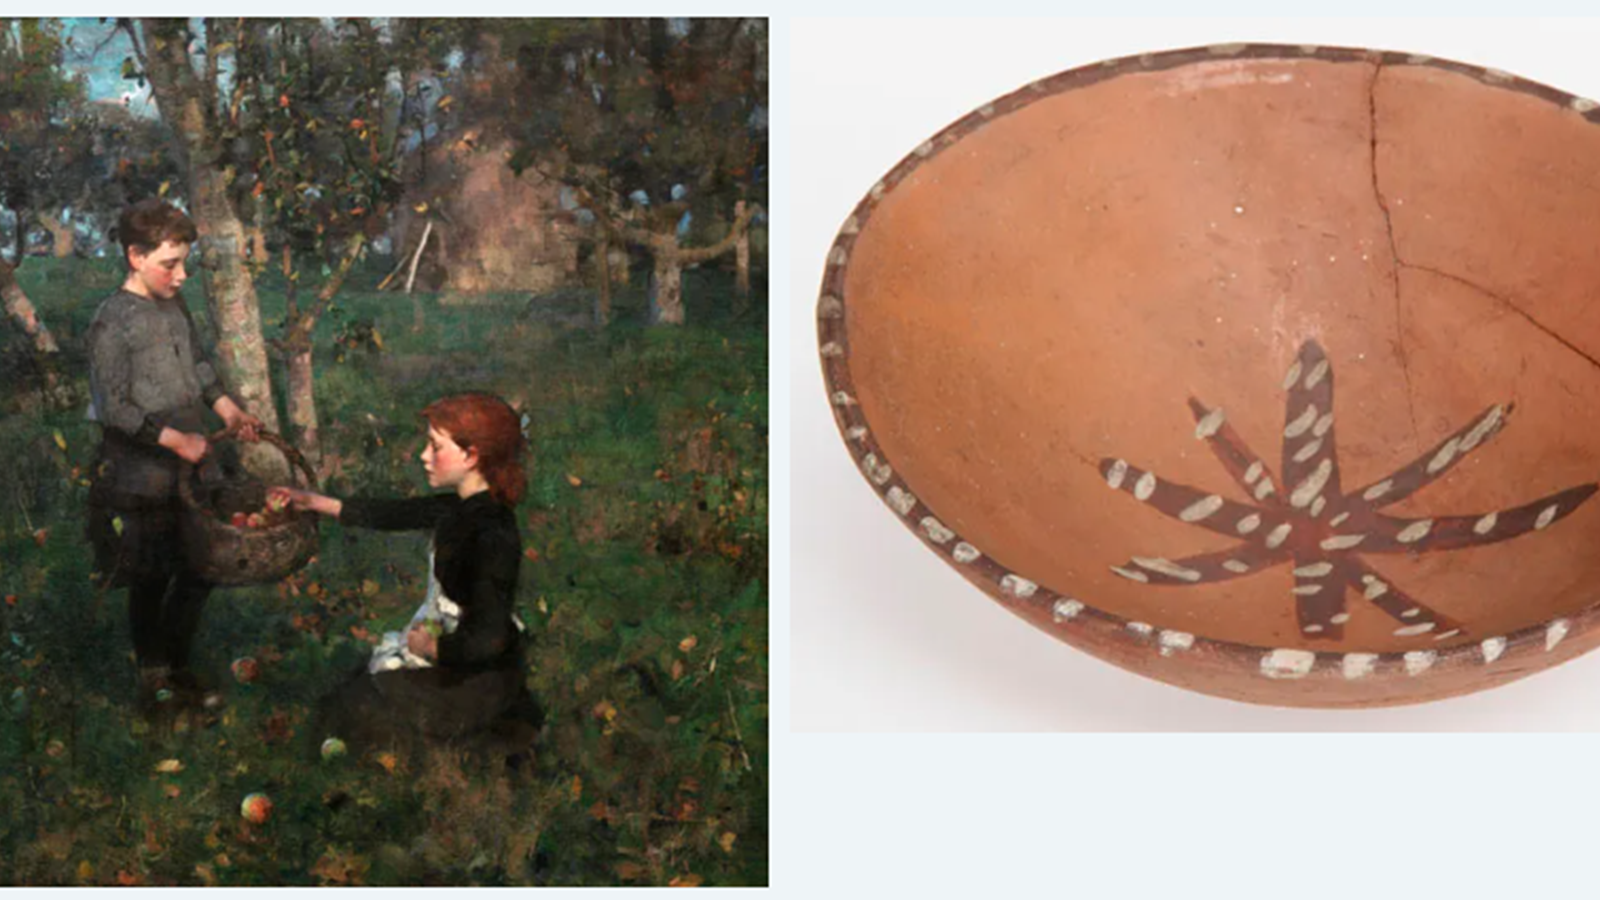 2 images: left shows two people in a woodland setting whilst the right hand image shows a brown ceramic bowl.